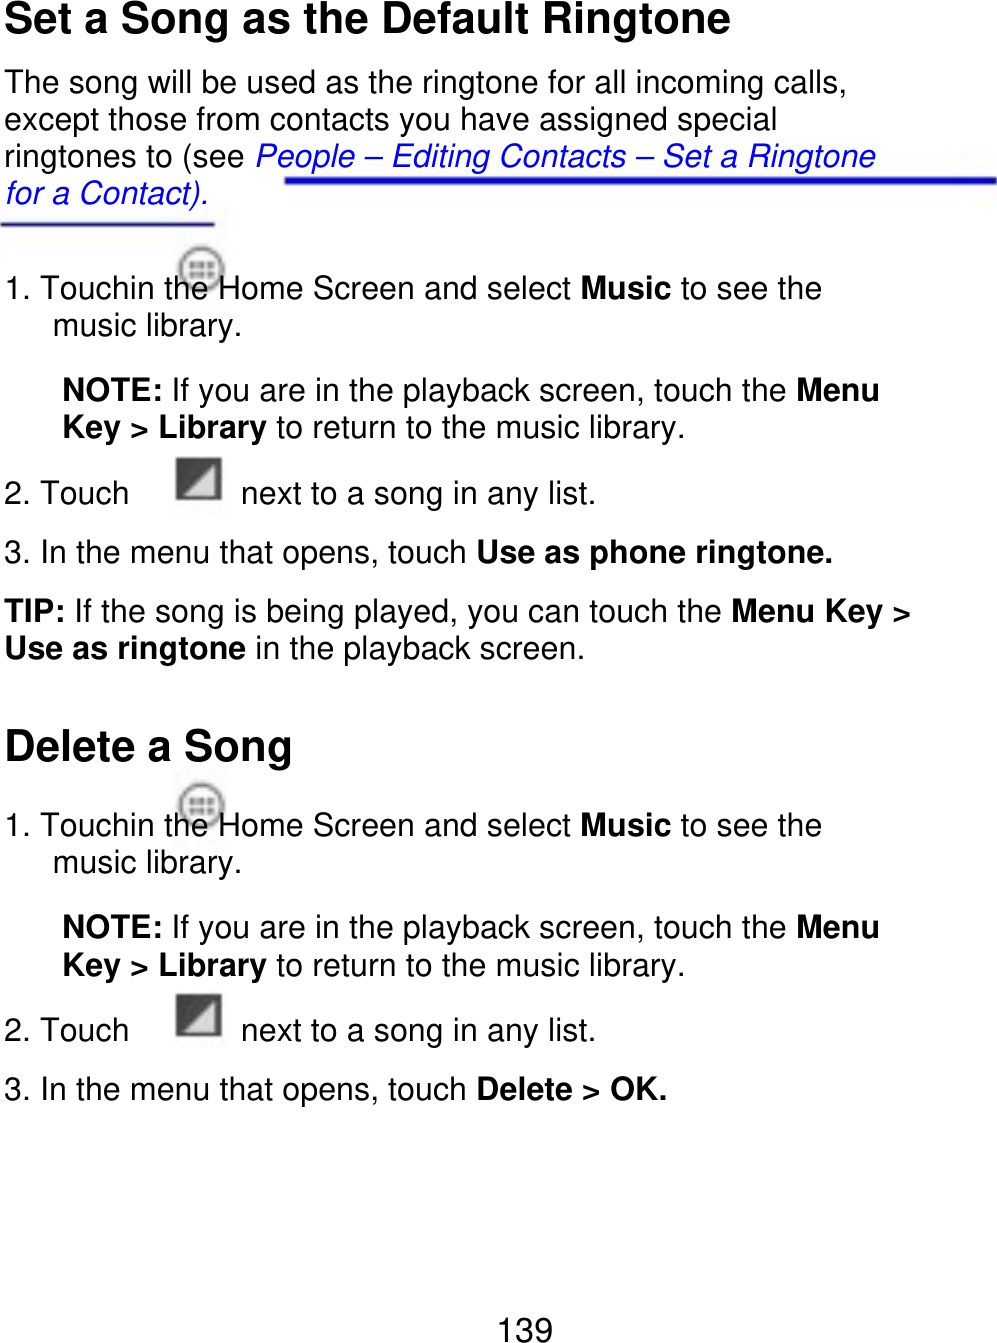 Set a Song as the Default Ringtone The song will be used as the ringtone for all incoming calls, except those from contacts you have assigned special ringtones to (see People – Editing Contacts – Set a Ringtone for a Contact). 1. Touchin the Home Screen and select Music to see the    music library. NOTE: If you are in the playback screen, touch the Menu Key &gt; Library to return to the music library. 2. Touch next to a song in any list. 3. In the menu that opens, touch Use as phone ringtone. TIP: If the song is being played, you can touch the Menu Key &gt; Use as ringtone in the playback screen. Delete a Song 1. Touchin the Home Screen and select Music to see the    music library. NOTE: If you are in the playback screen, touch the Menu Key &gt; Library to return to the music library. 2. Touch next to a song in any list. 3. In the menu that opens, touch Delete &gt; OK. 139 